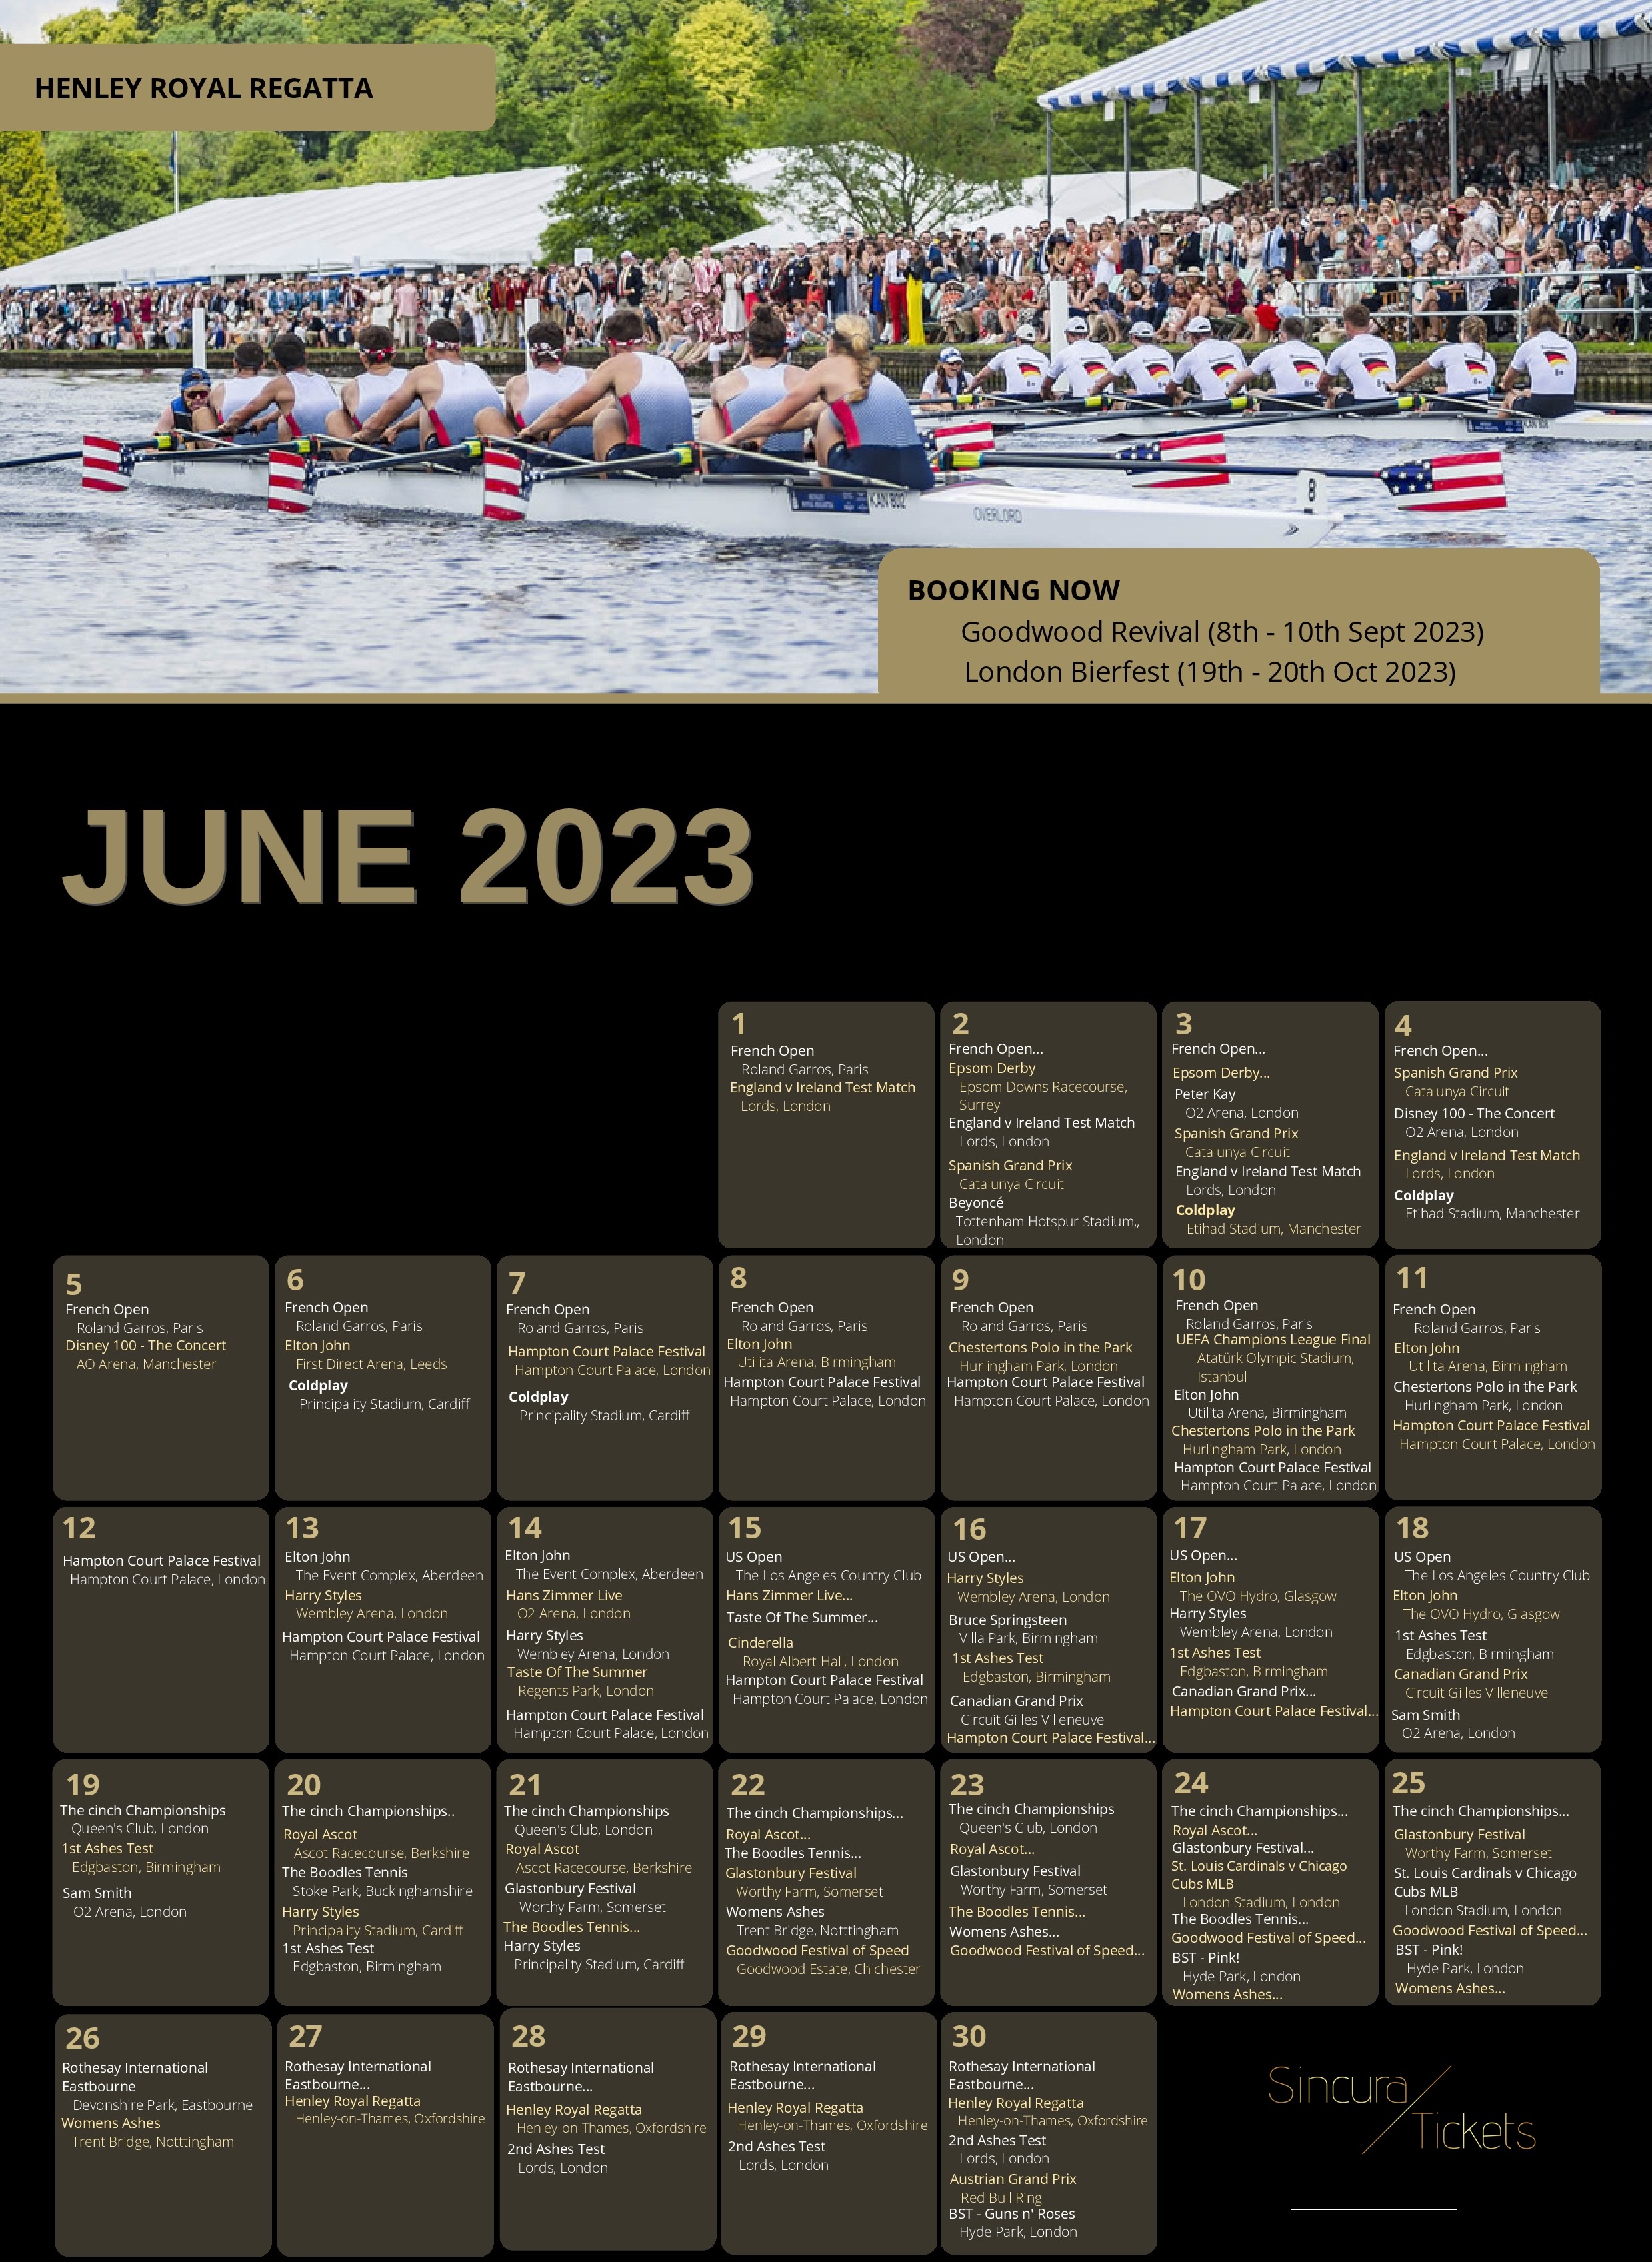 diary of events in london in june 2023